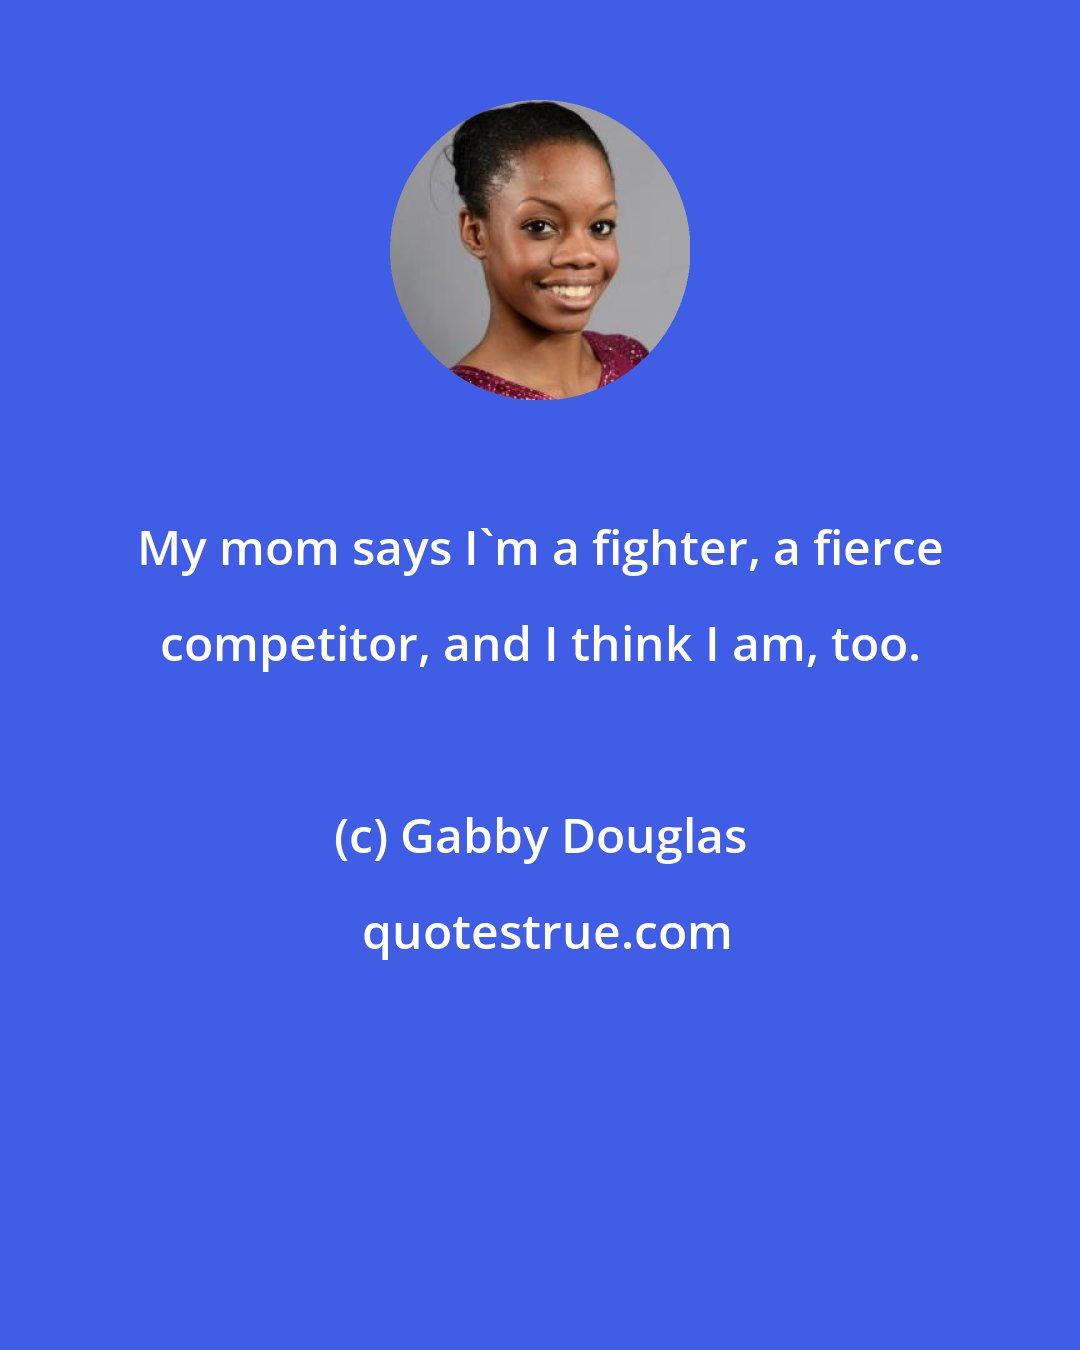 Gabby Douglas: My mom says I'm a fighter, a fierce competitor, and I think I am, too.